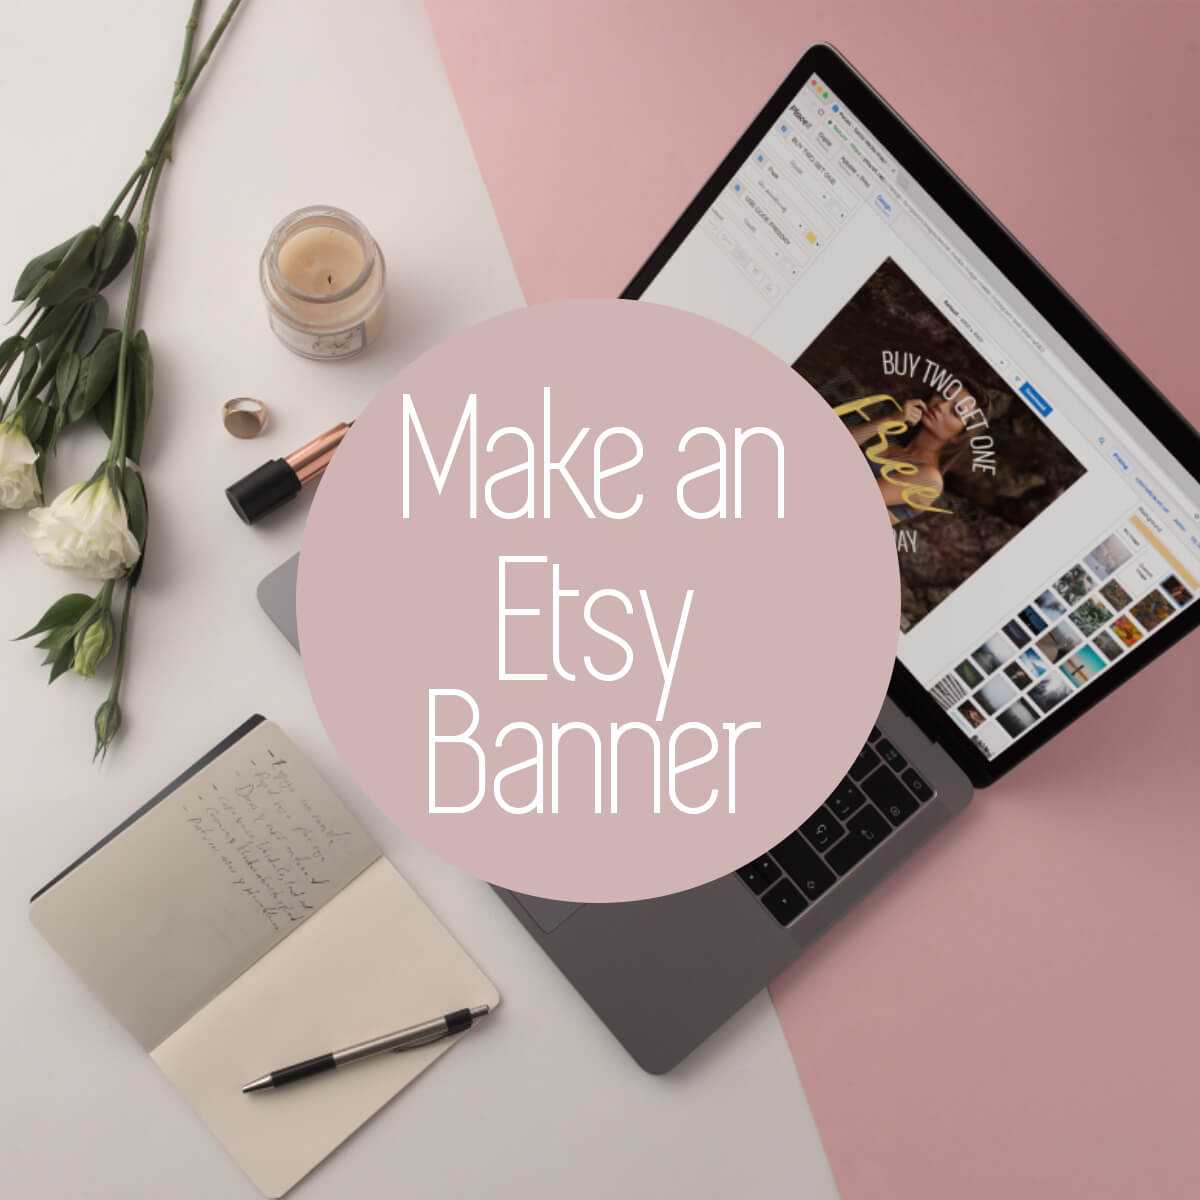 Personalize Your Etsy Shop - Cover Photos And Banners Intended For Free Etsy Banner Template